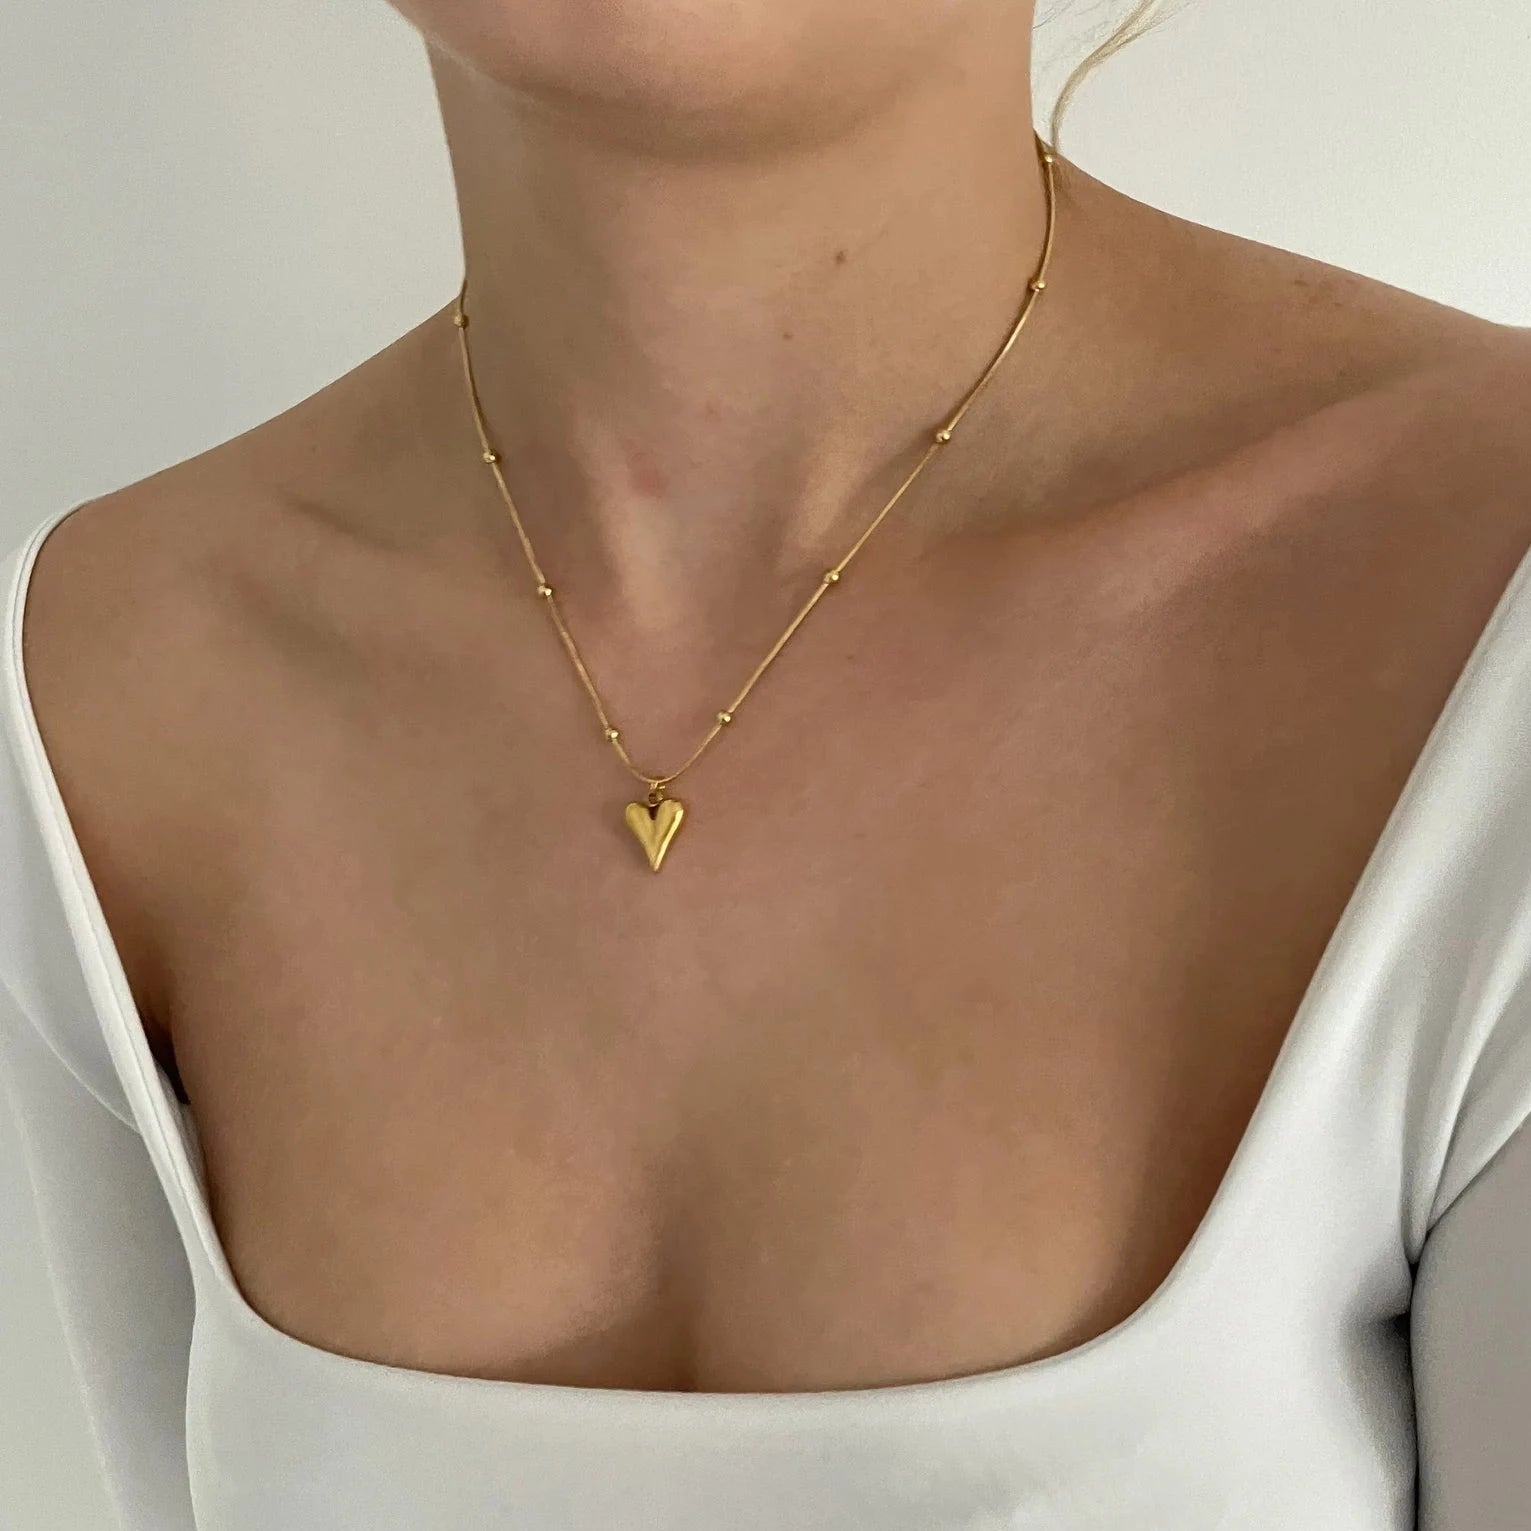 "Heart Chain Necklace - Expertly crafted with attention to detail, this necklace exudes quality craftsmanship and exquisite beauty, making it a standout accessory